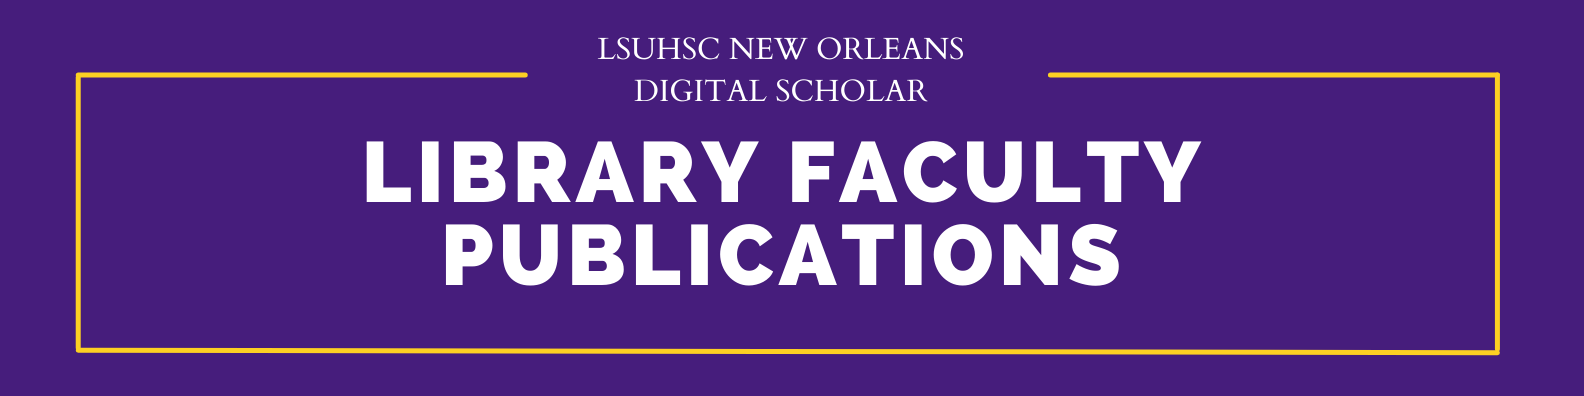 Library Faculty Publications